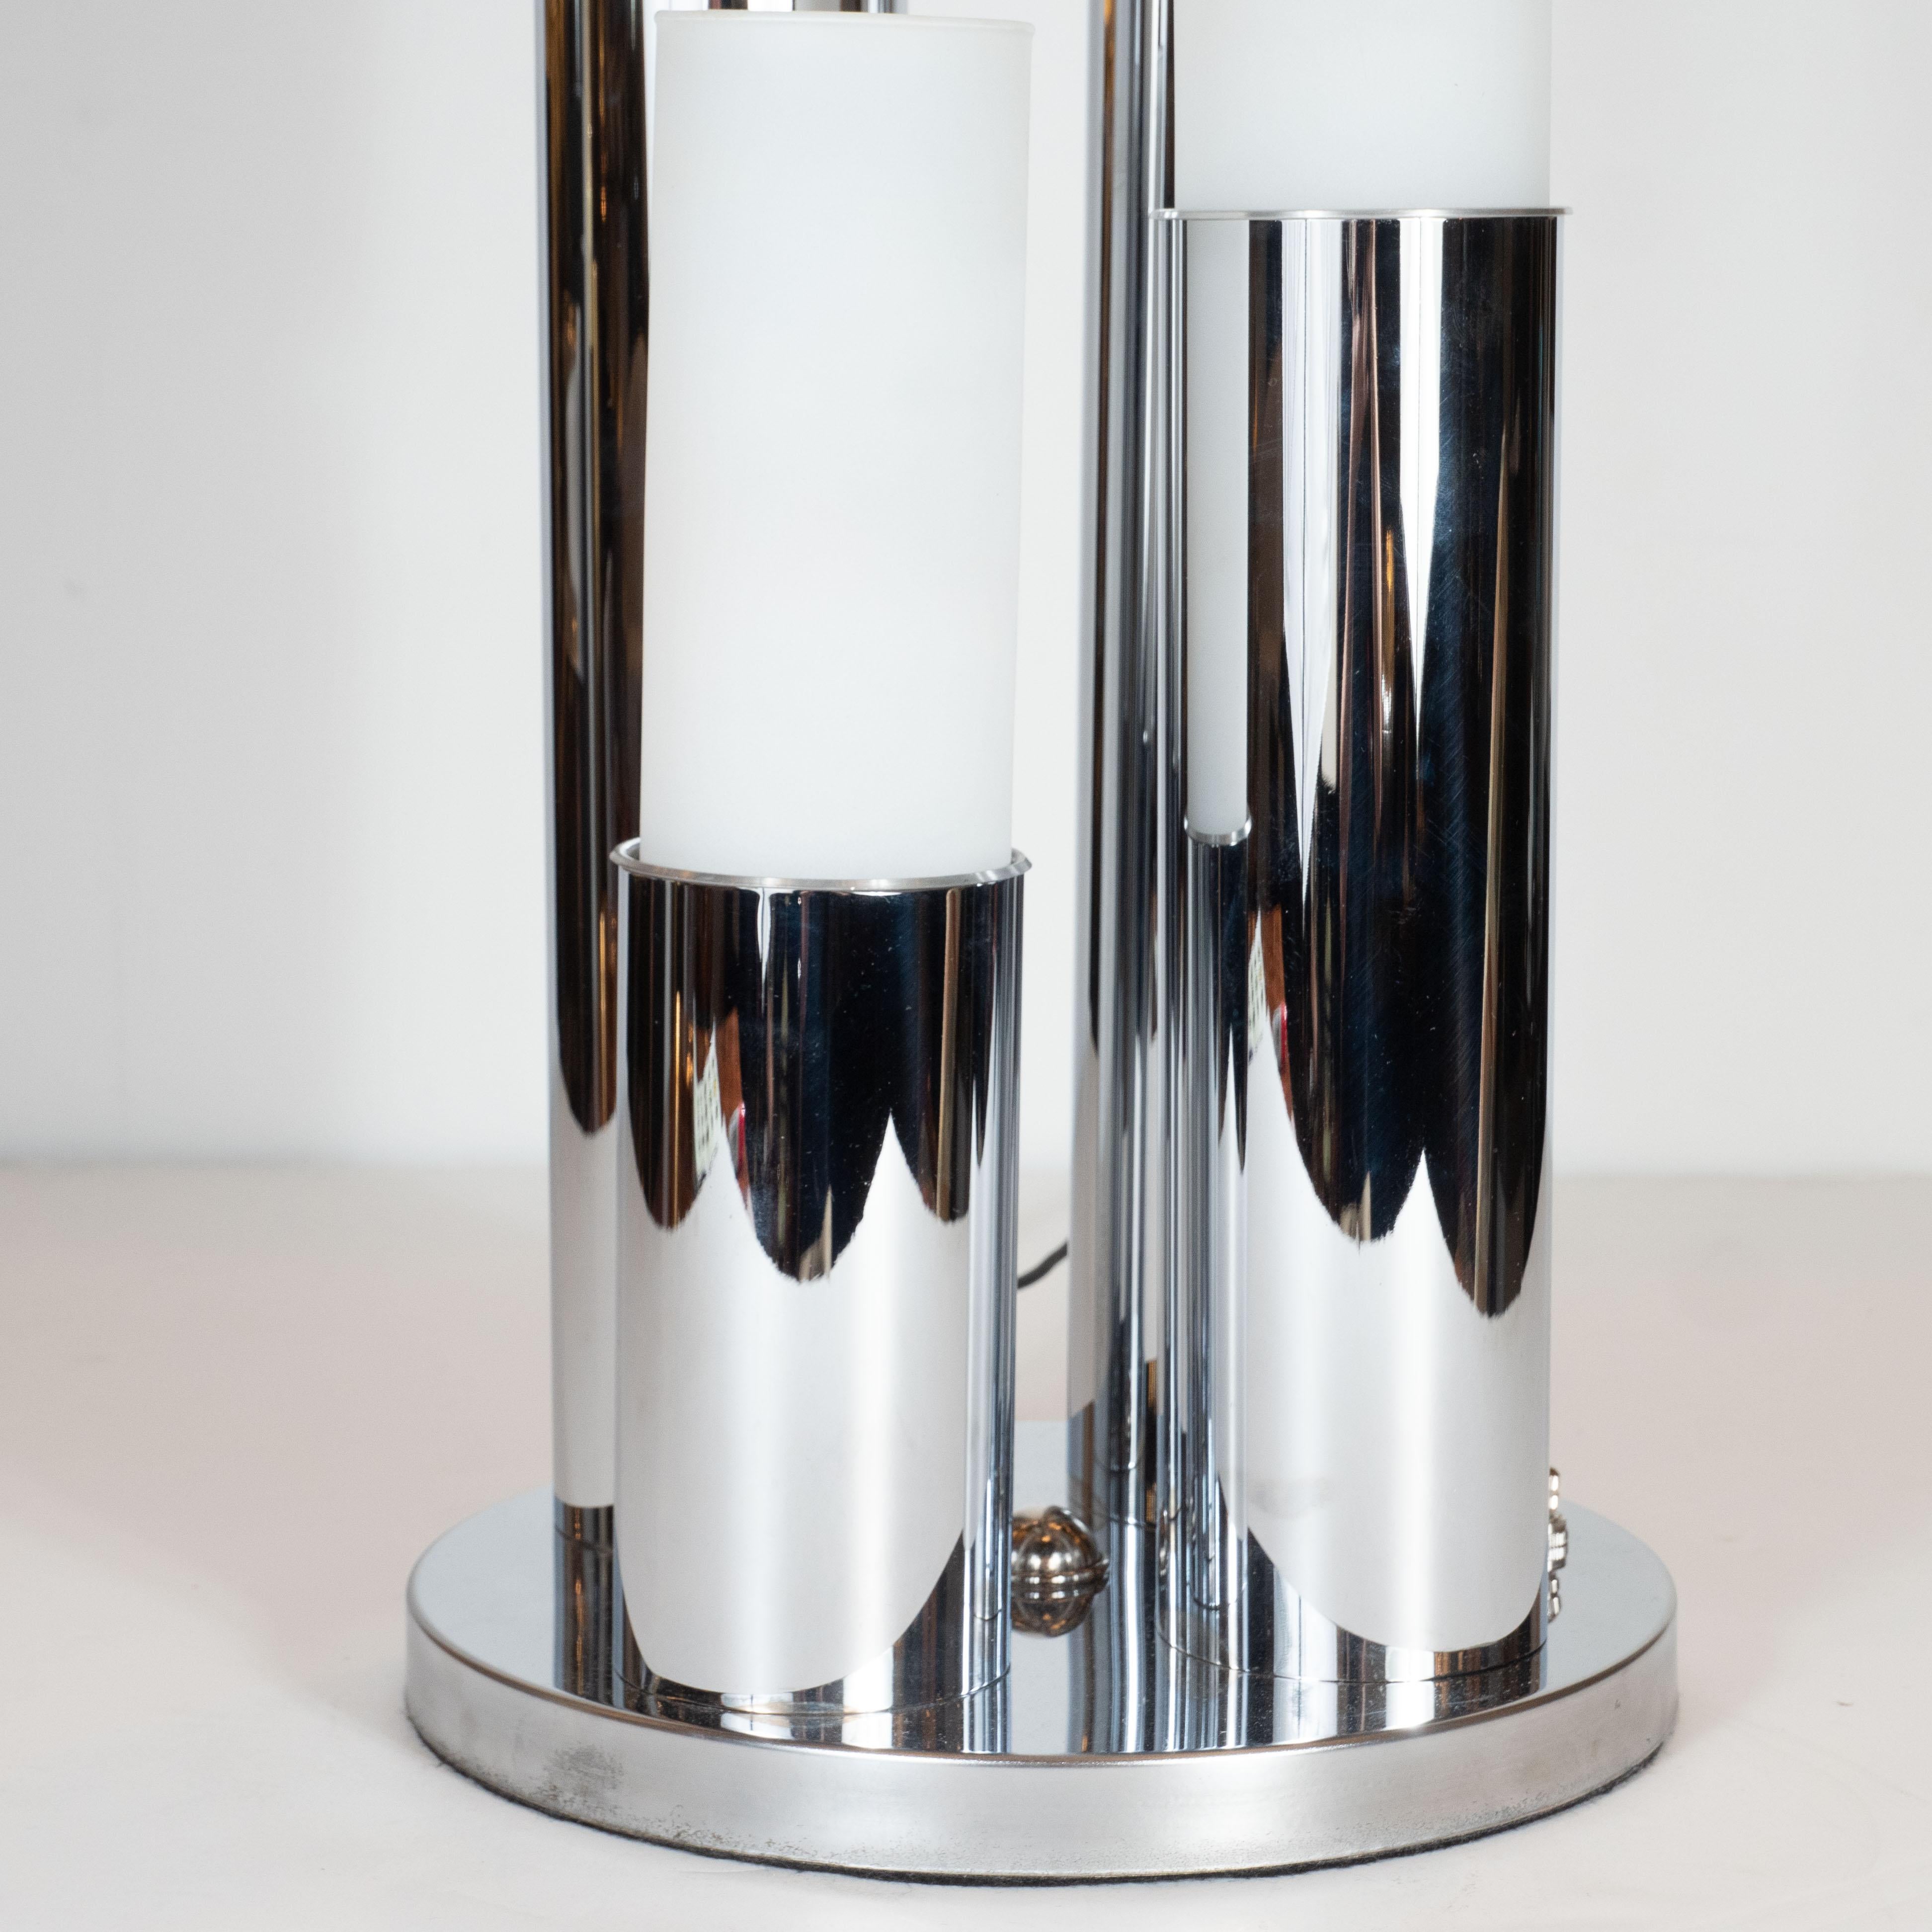 This stunning and graphic Mid-Century Modern uplight/ table lamp was realized in the United States, circa 1970. It features four cylindrical bodies rising from a circular chrome base, like perfectly formed stalagmites, capped with frosted glass